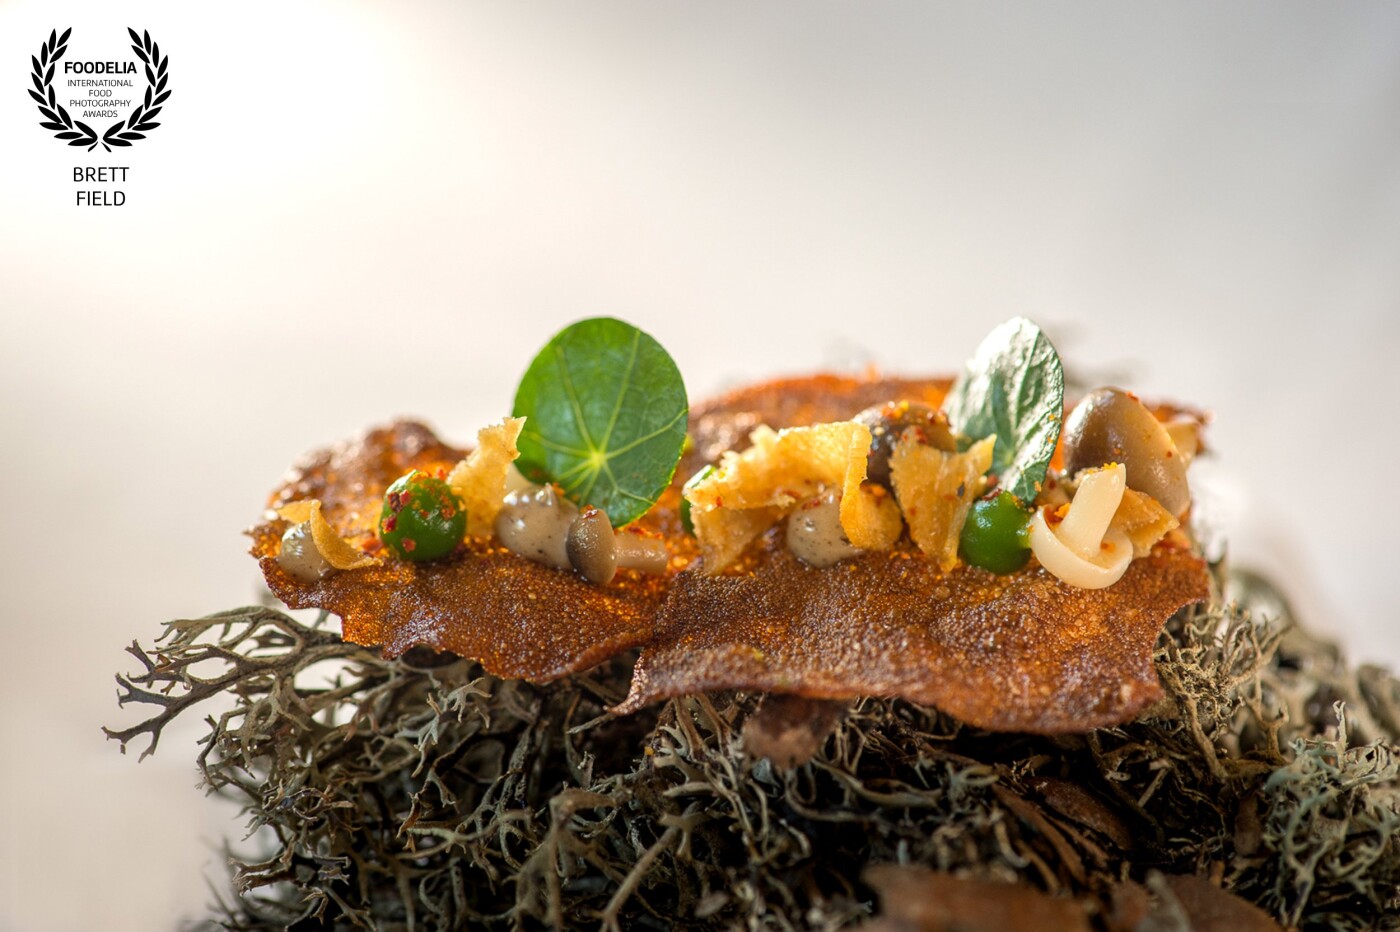 This was from a shoot I did for The Ritz Hotel in London. This mushroom masterpiece is a delicate and delicious. Fine dining at its finest indeed. 